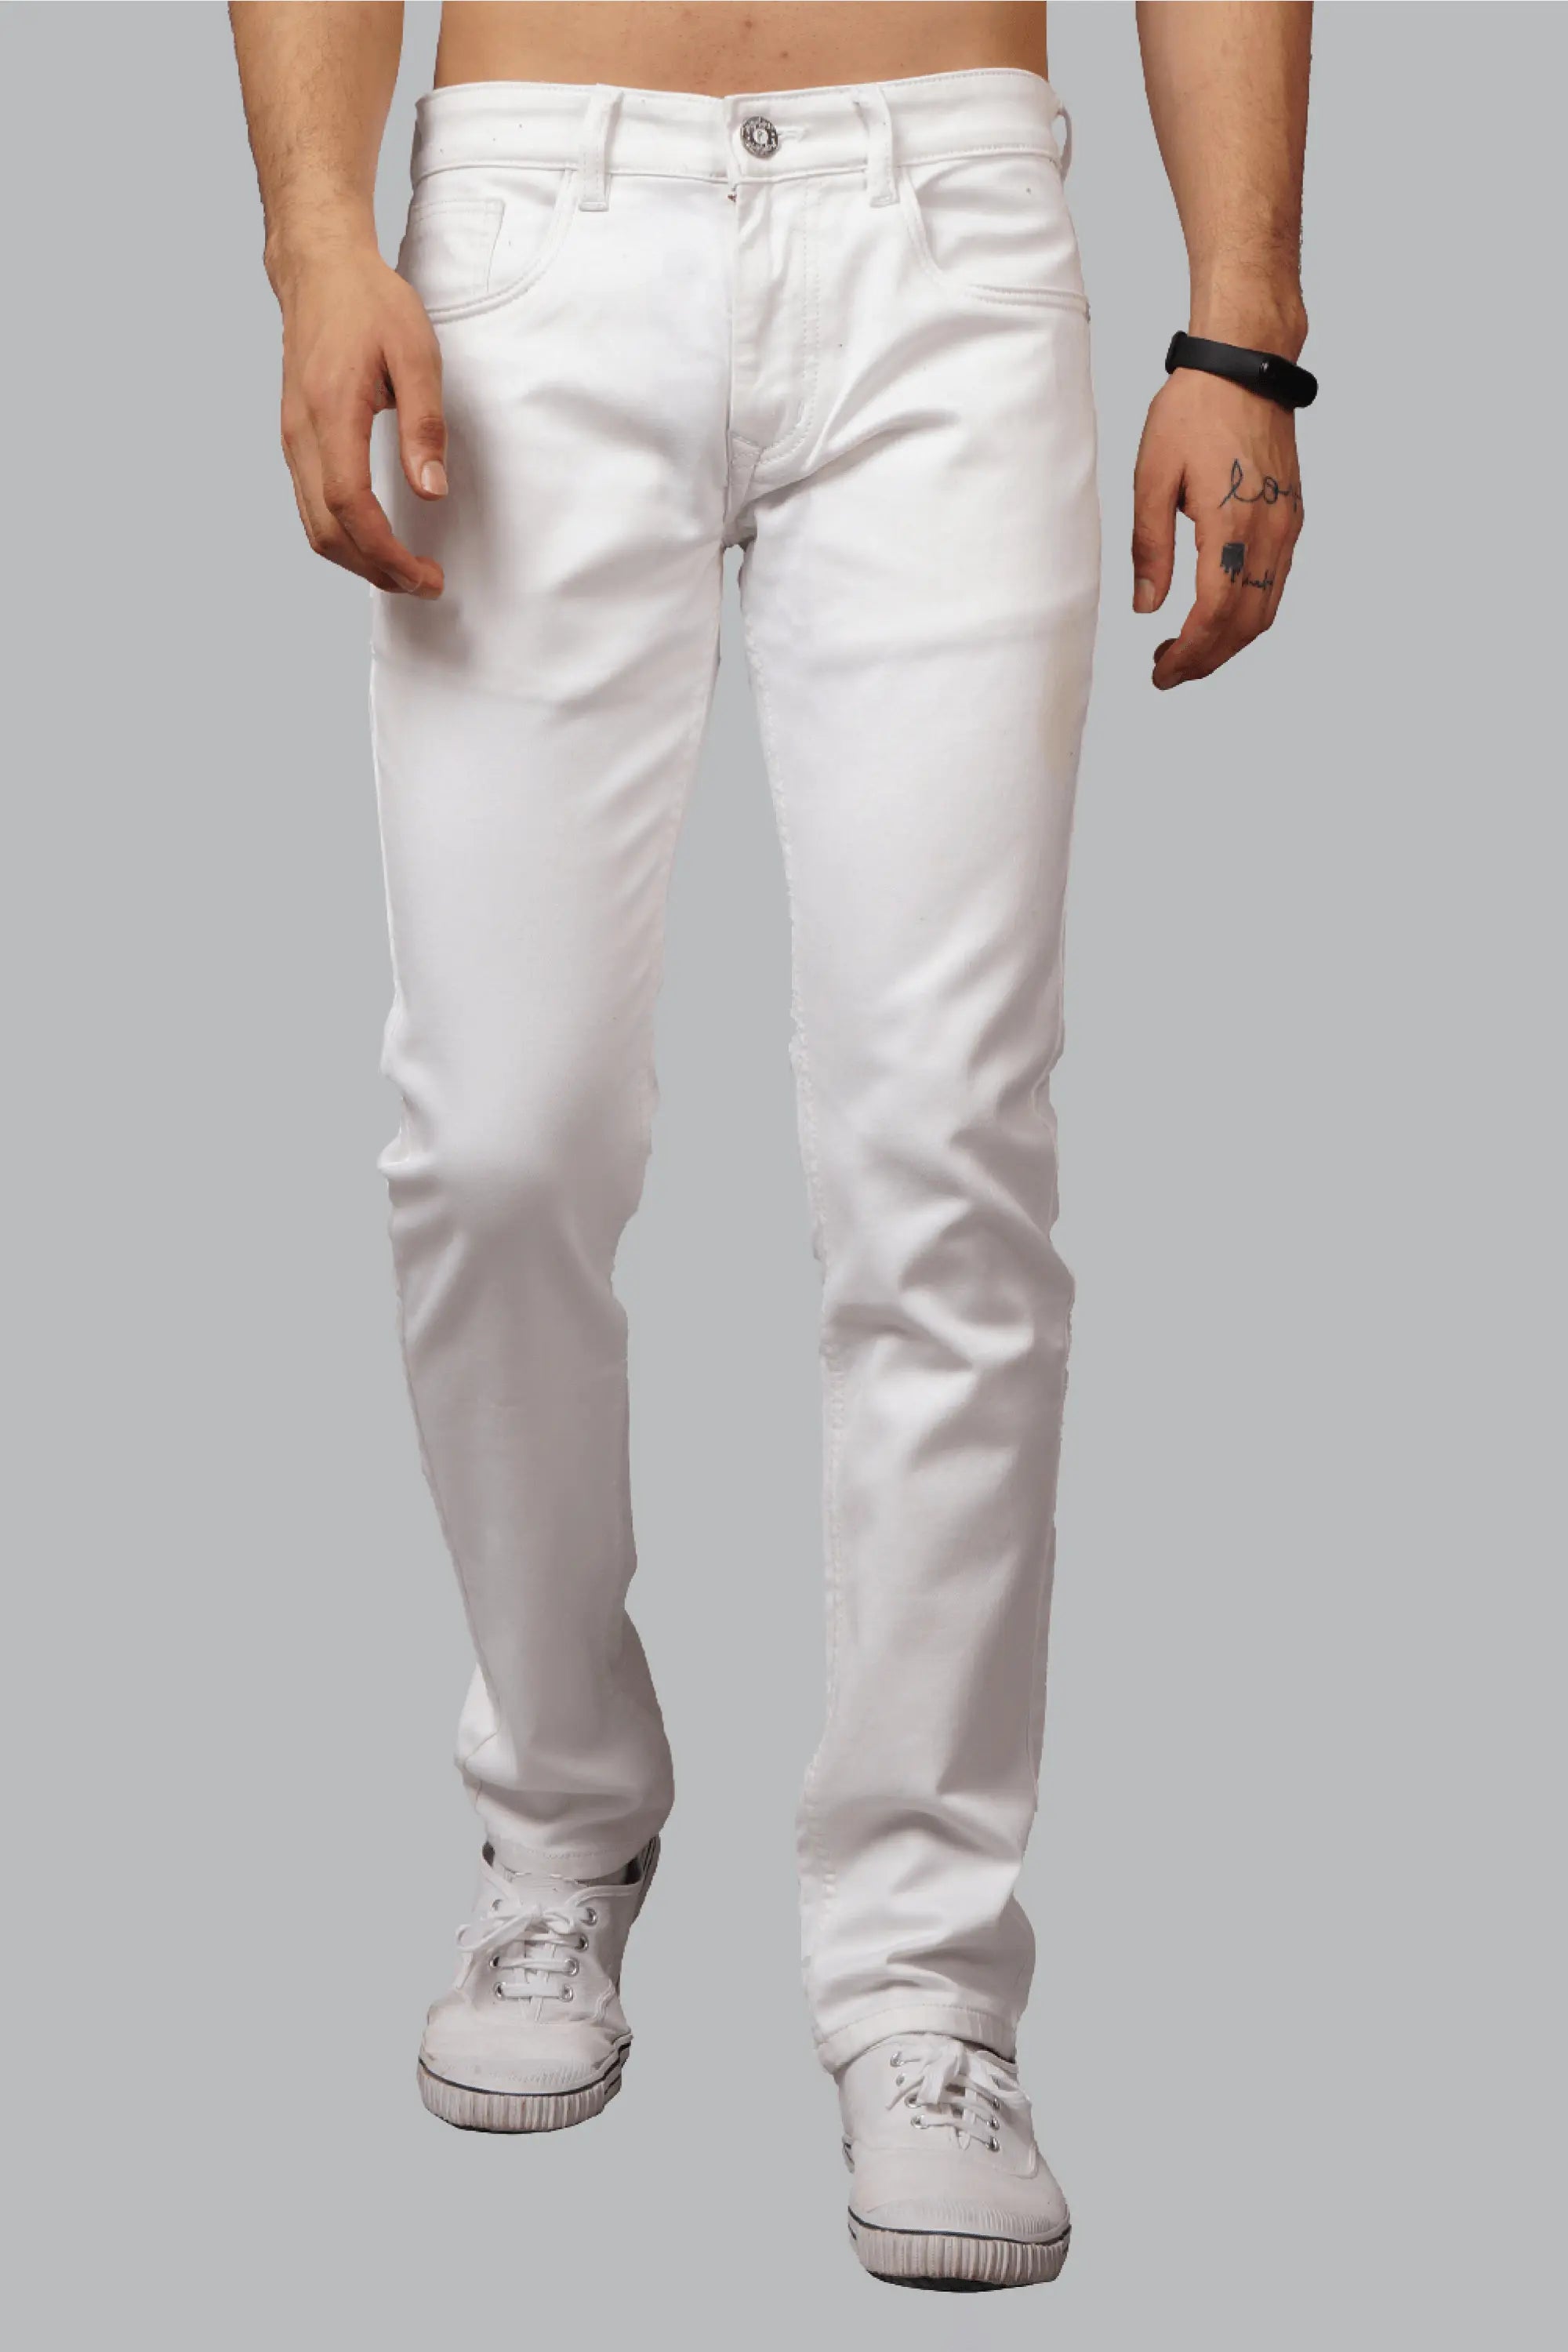 Buy Off-White Jeans for Men by DNMX Online | Ajio.com